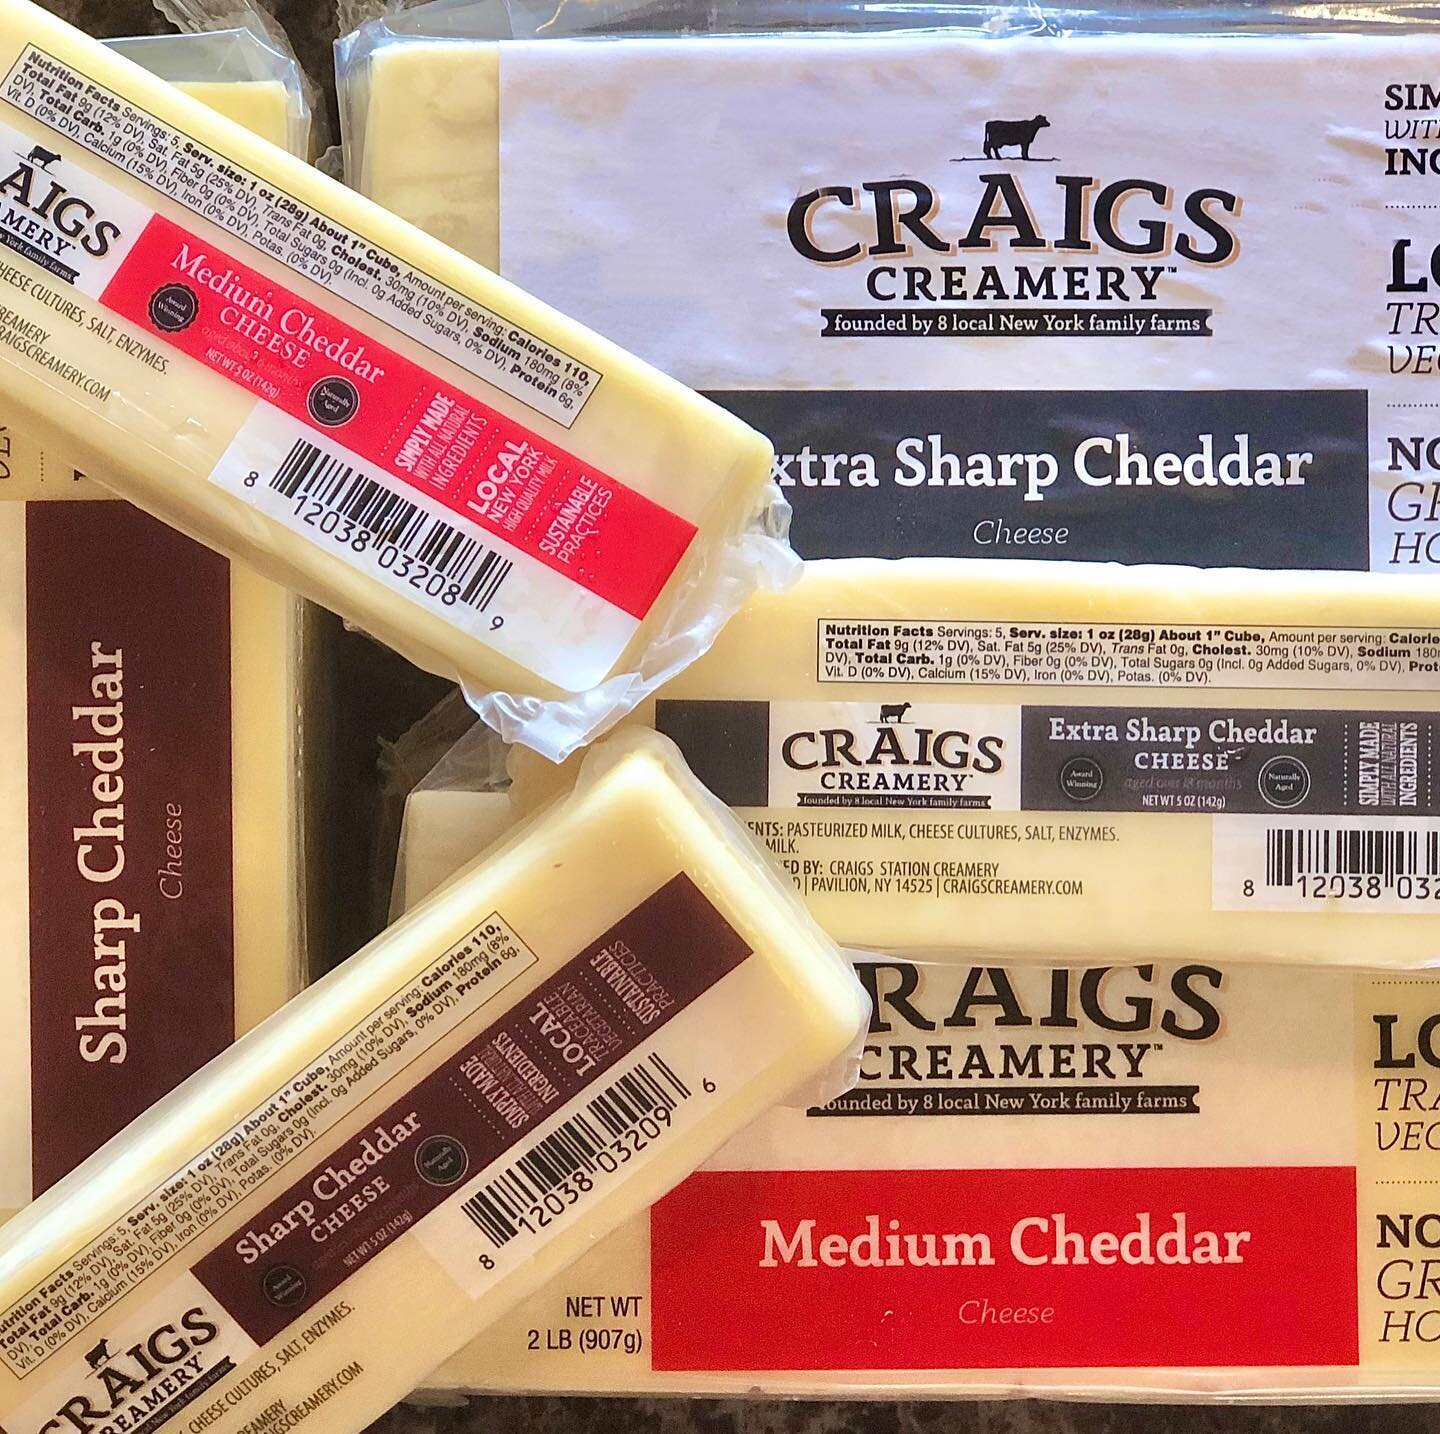 Our loyal customers recently learned our news that our Craigs cheese facility will idle production, starting today. The reasons for this idling are varied, with impacts from COVID-19 and ensuing disruptions in the food service channels playing a lead